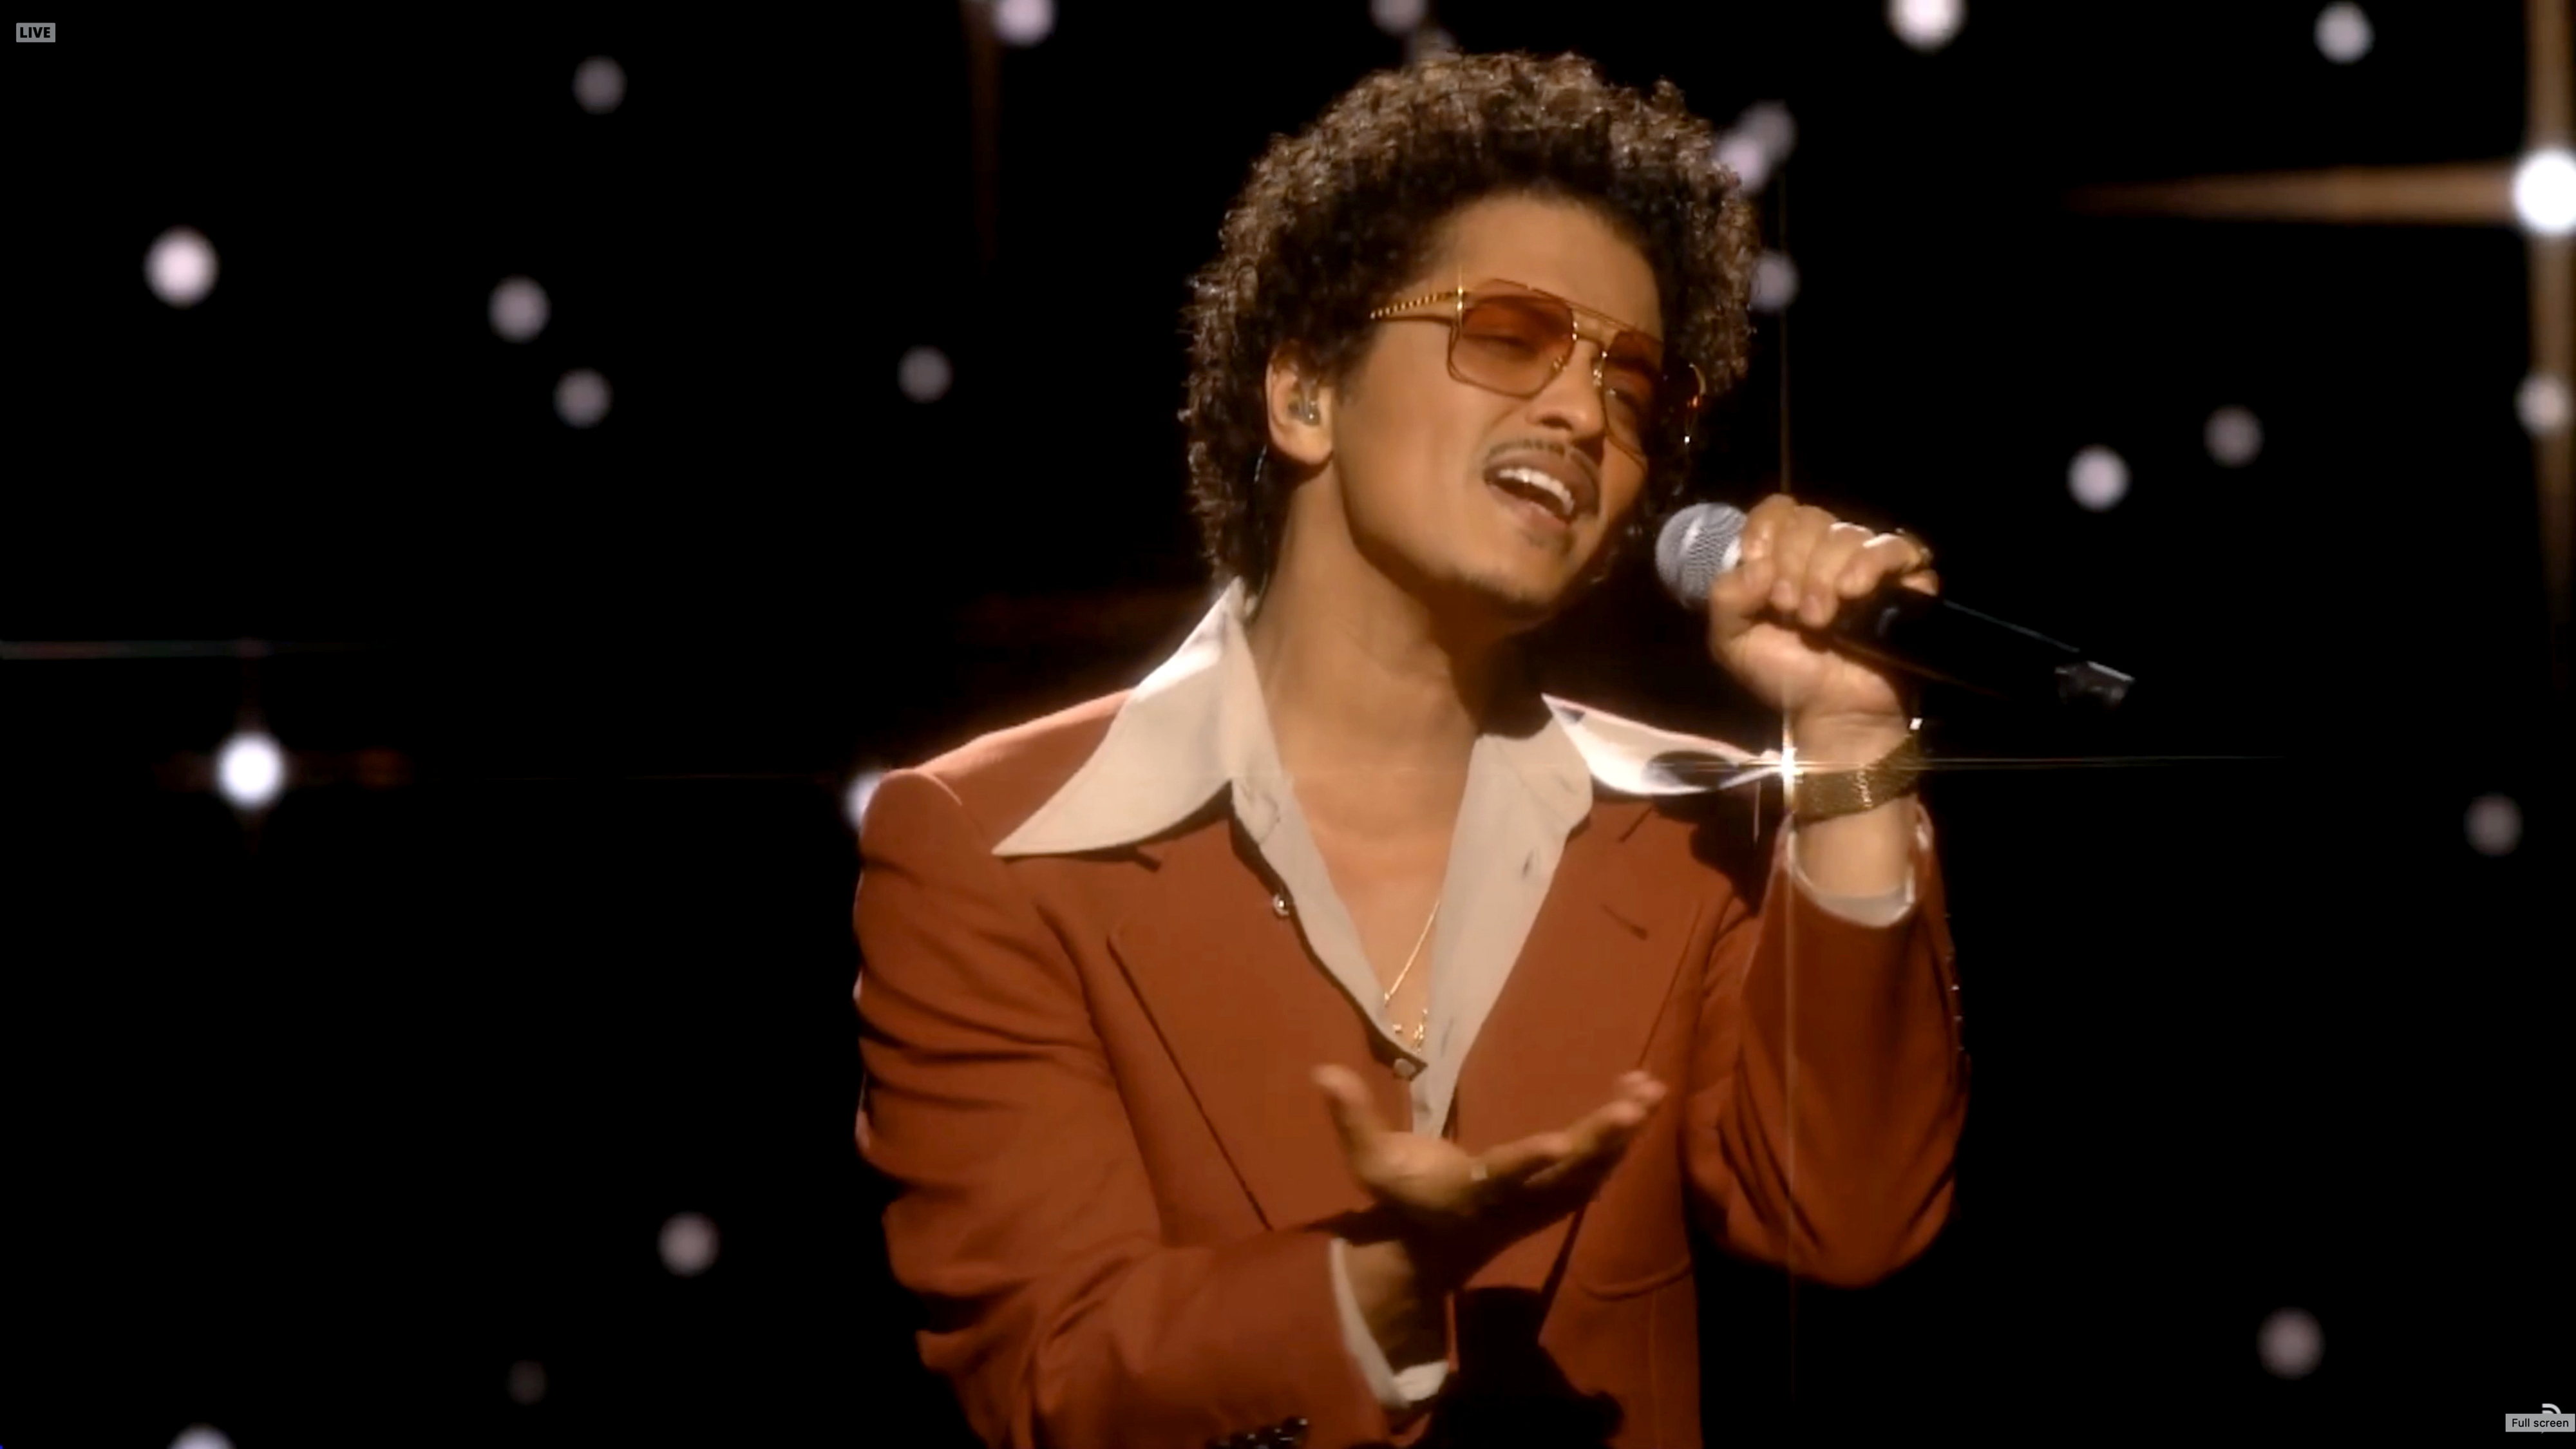 Bruno Mars performs on stage, wearing a velvet jacket, with a microphone in hand